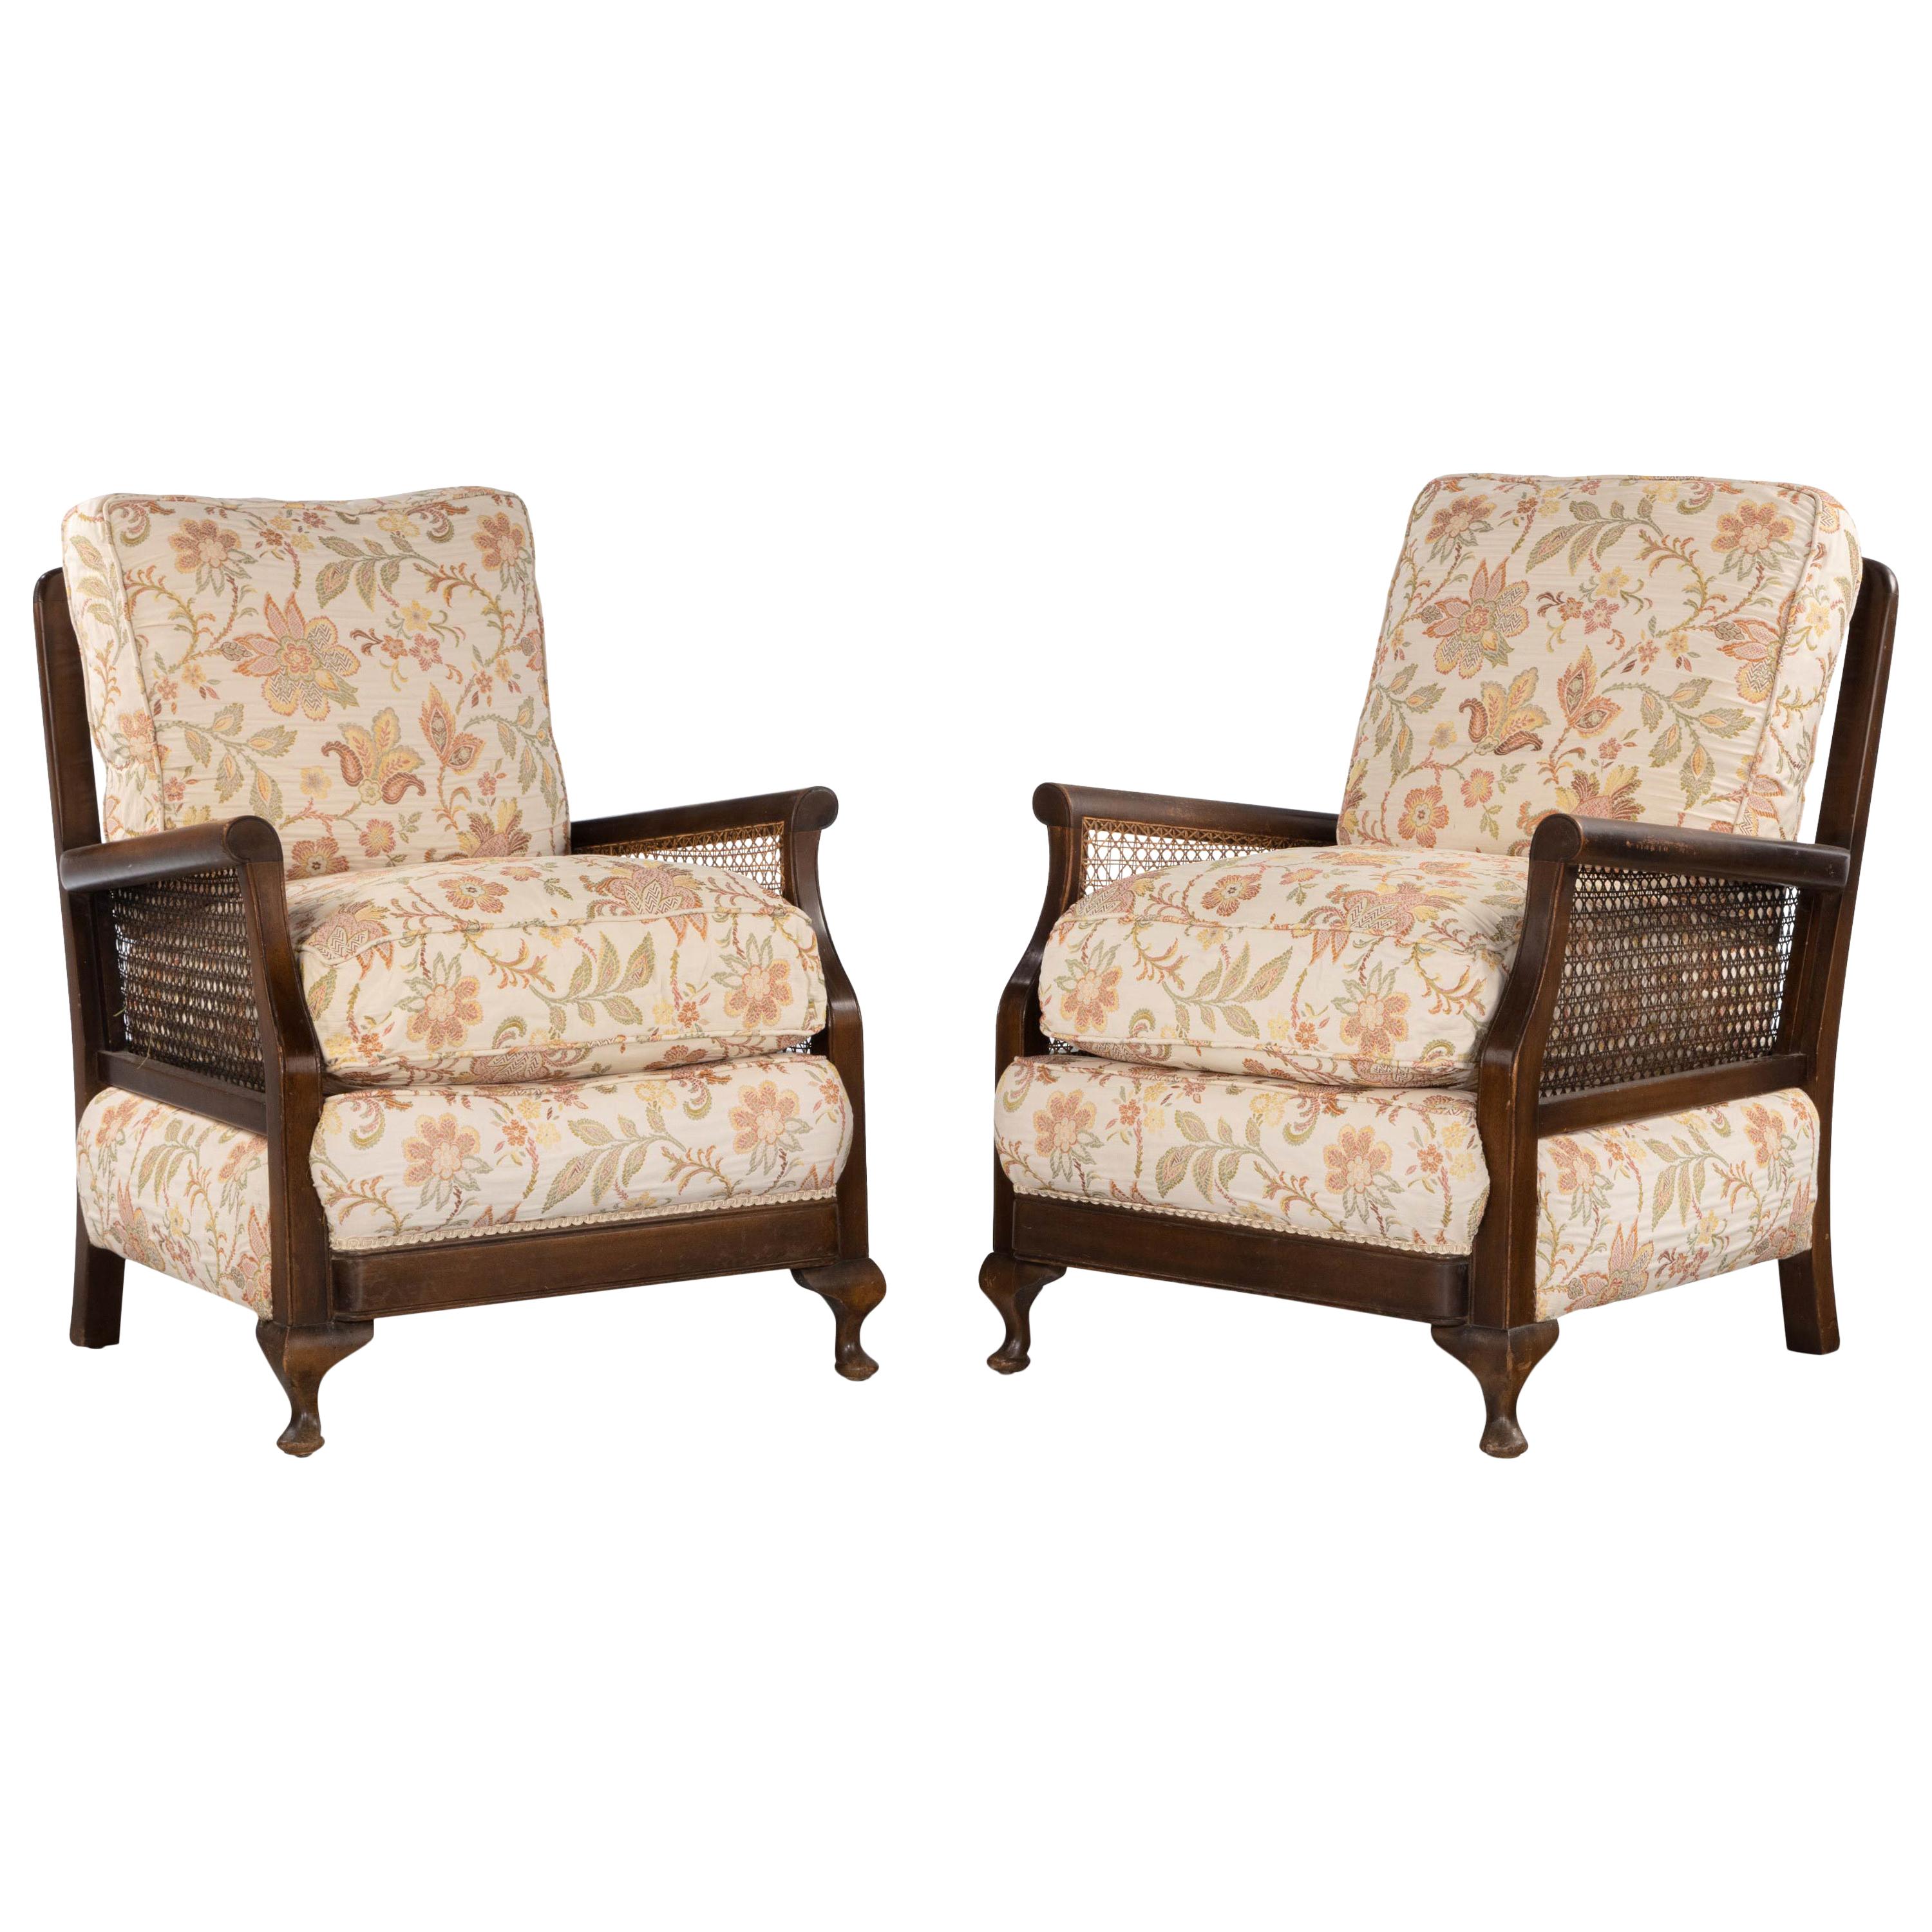 Attractive Late 20th Century Pair of Mahogany and Canework Chairs